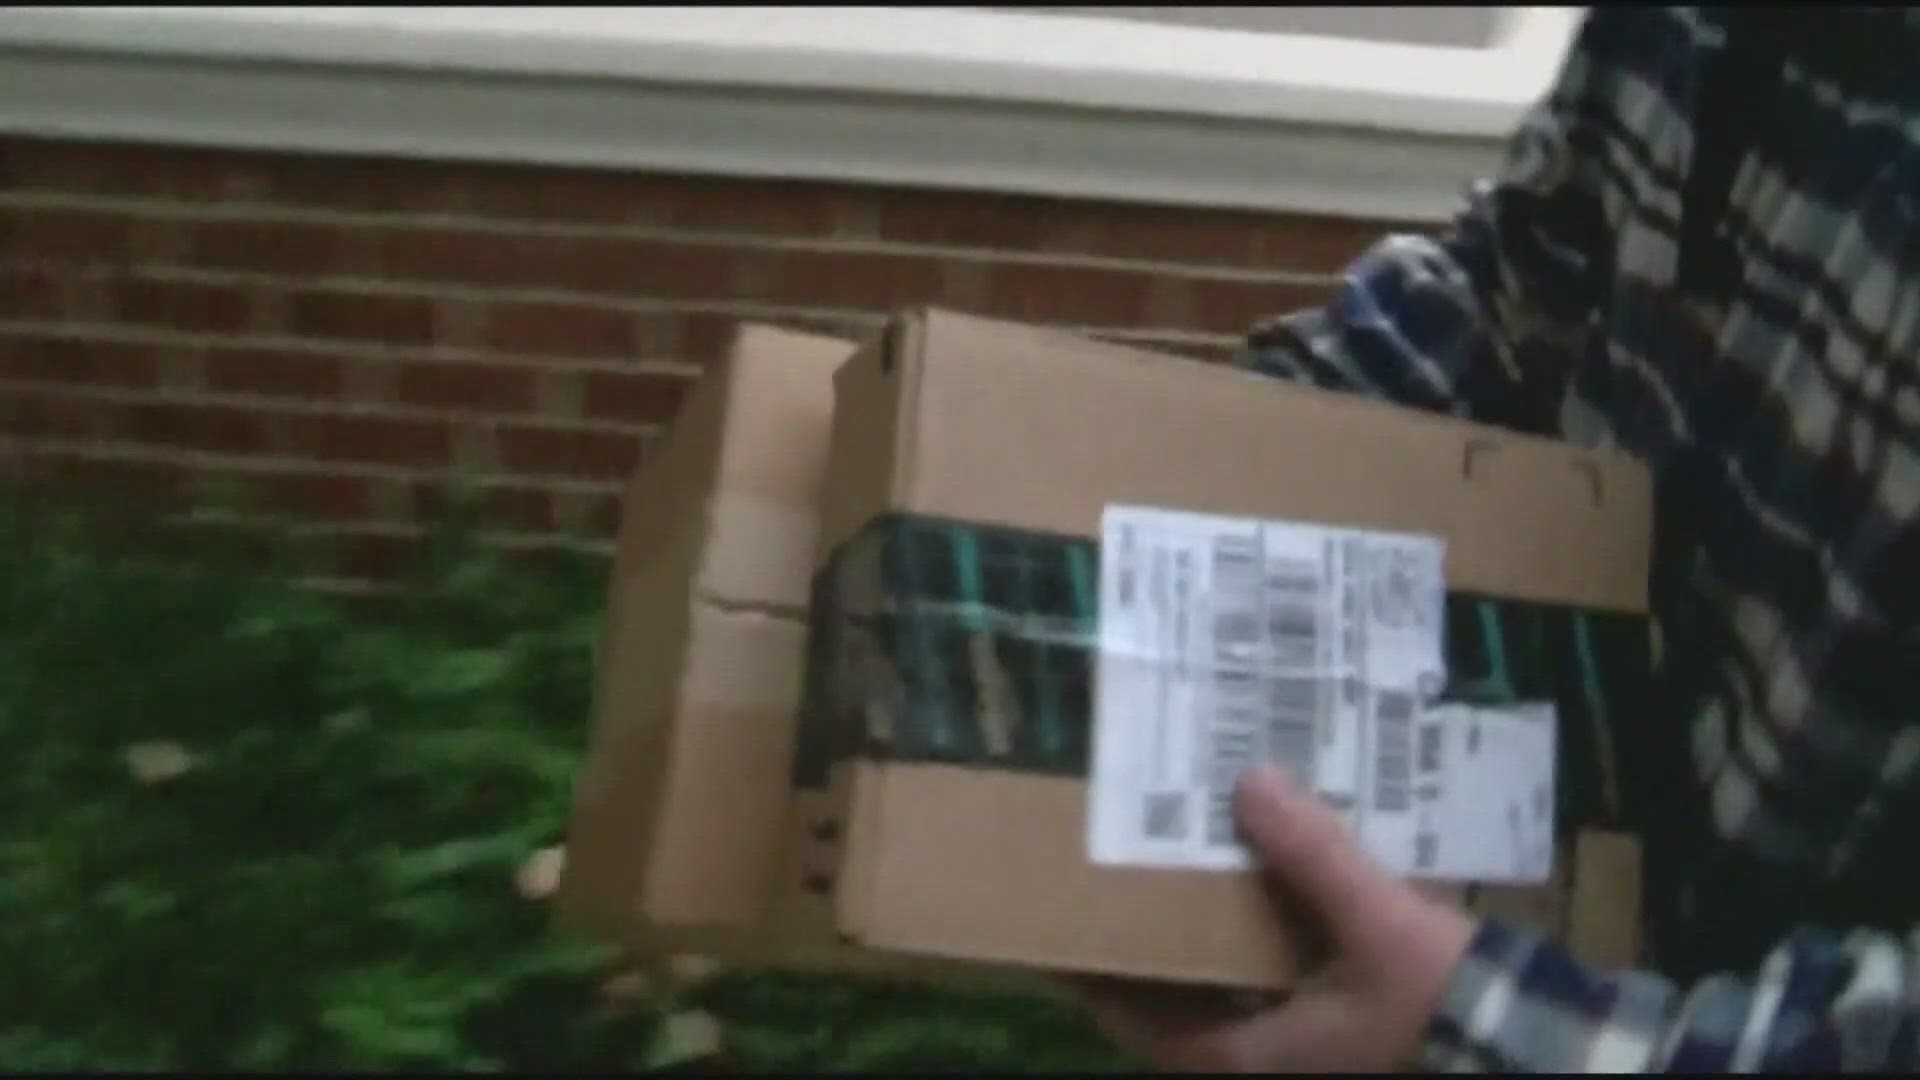 One report found 14% of Americans were victims of porch piracy last year, to a tune of about $29 billion in stolen packages.